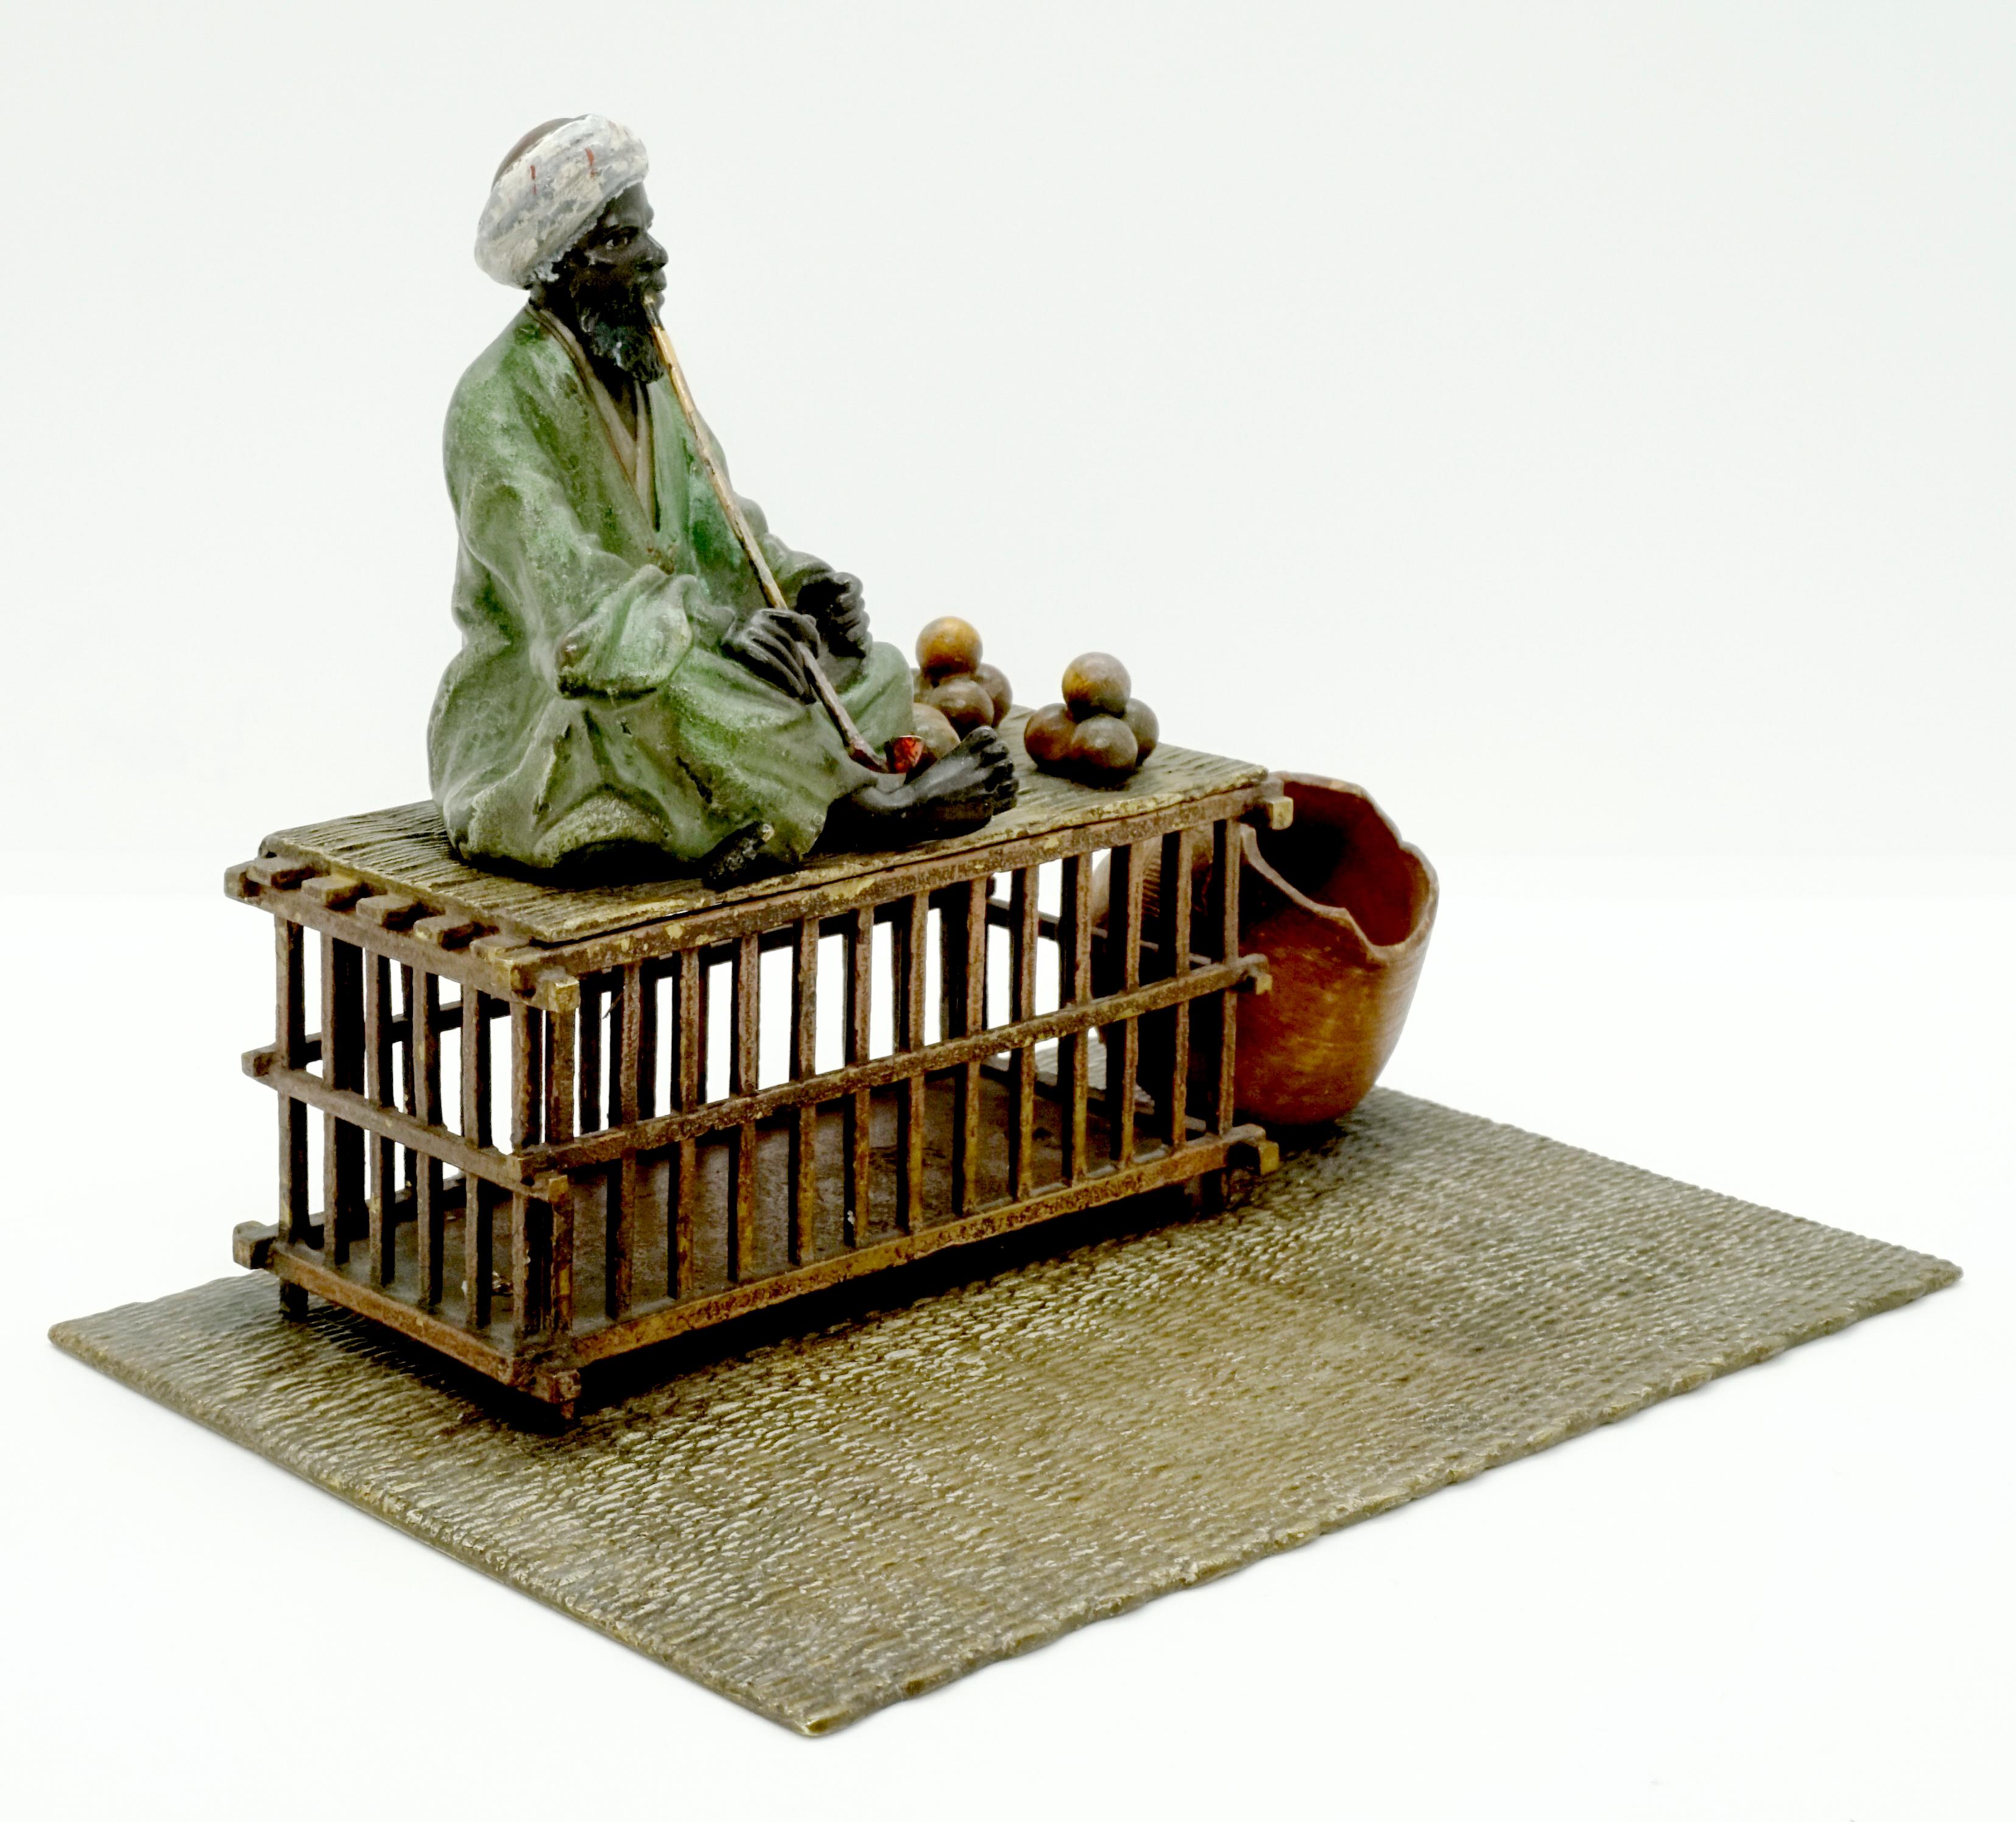 Excellent piece of Viennese bronze Art, circa 1900:
A bearded oriental in a long green robe and turban sits cross-legged on a hinged wooden cage on a carpet and smokes a long pipe. Next to him are piled balls that could be oranges, next to the cage